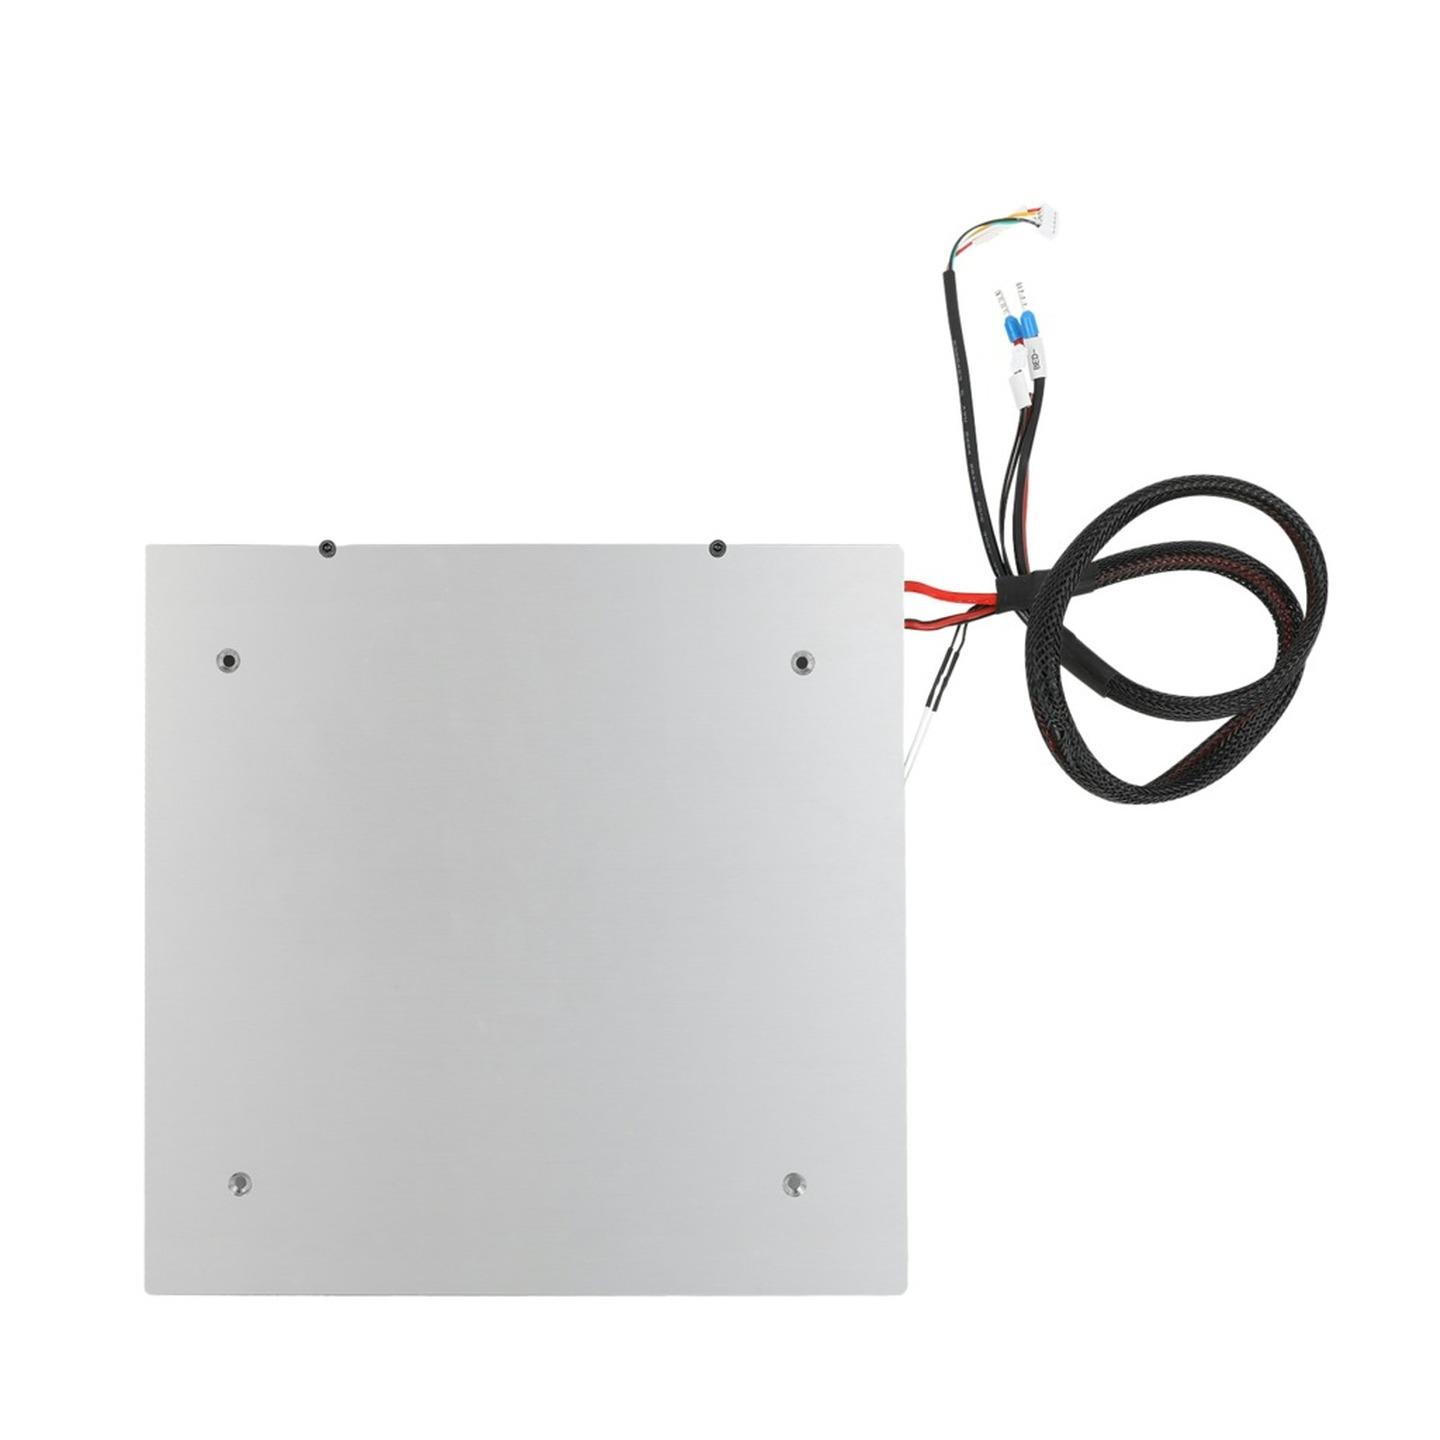 Replacement Hot Bed Plate Kit for K1 3D Printer